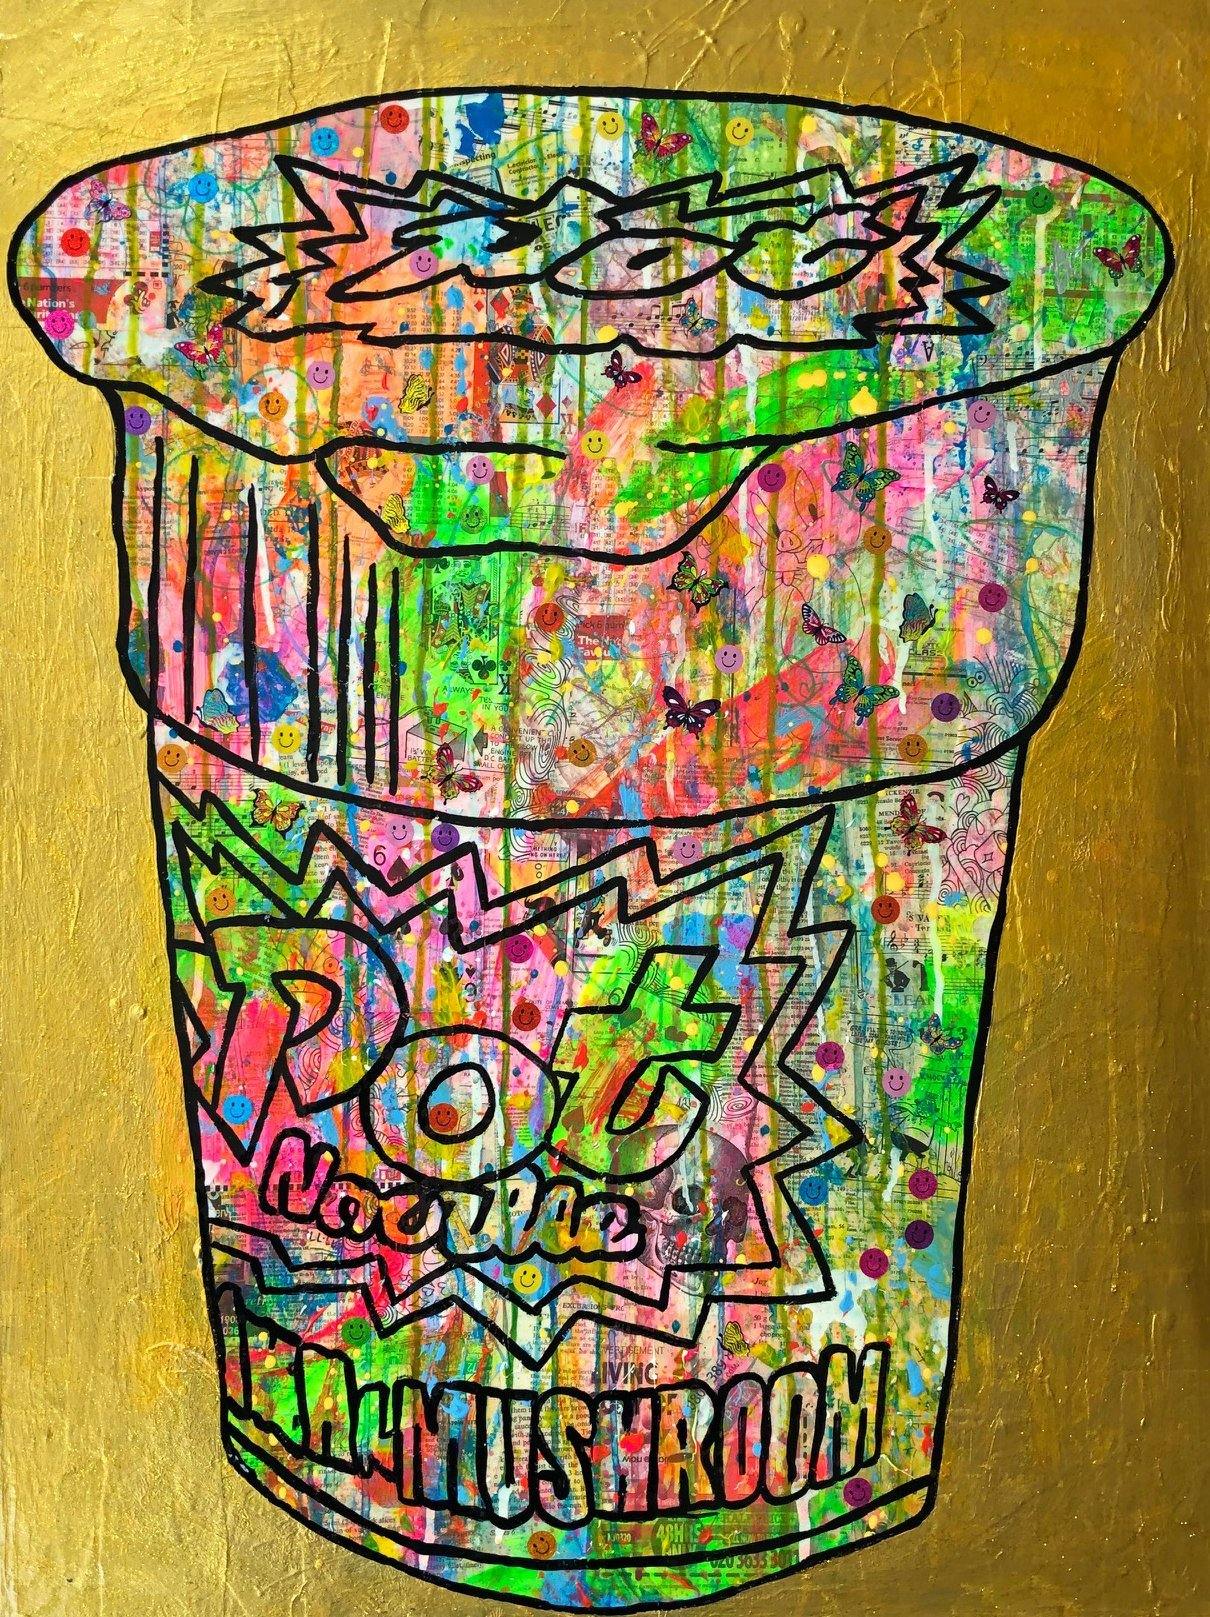 Pop noodle-ism by Barrie J Davies 2019, mixed media on canvas, Unframed, 60cm x 80cm. Barrie J Davies is an Artist - Pop Art and Street art inspired Artist based in Brighton England UK - Pop Art Paintings, Street Art Prints & Editions available.